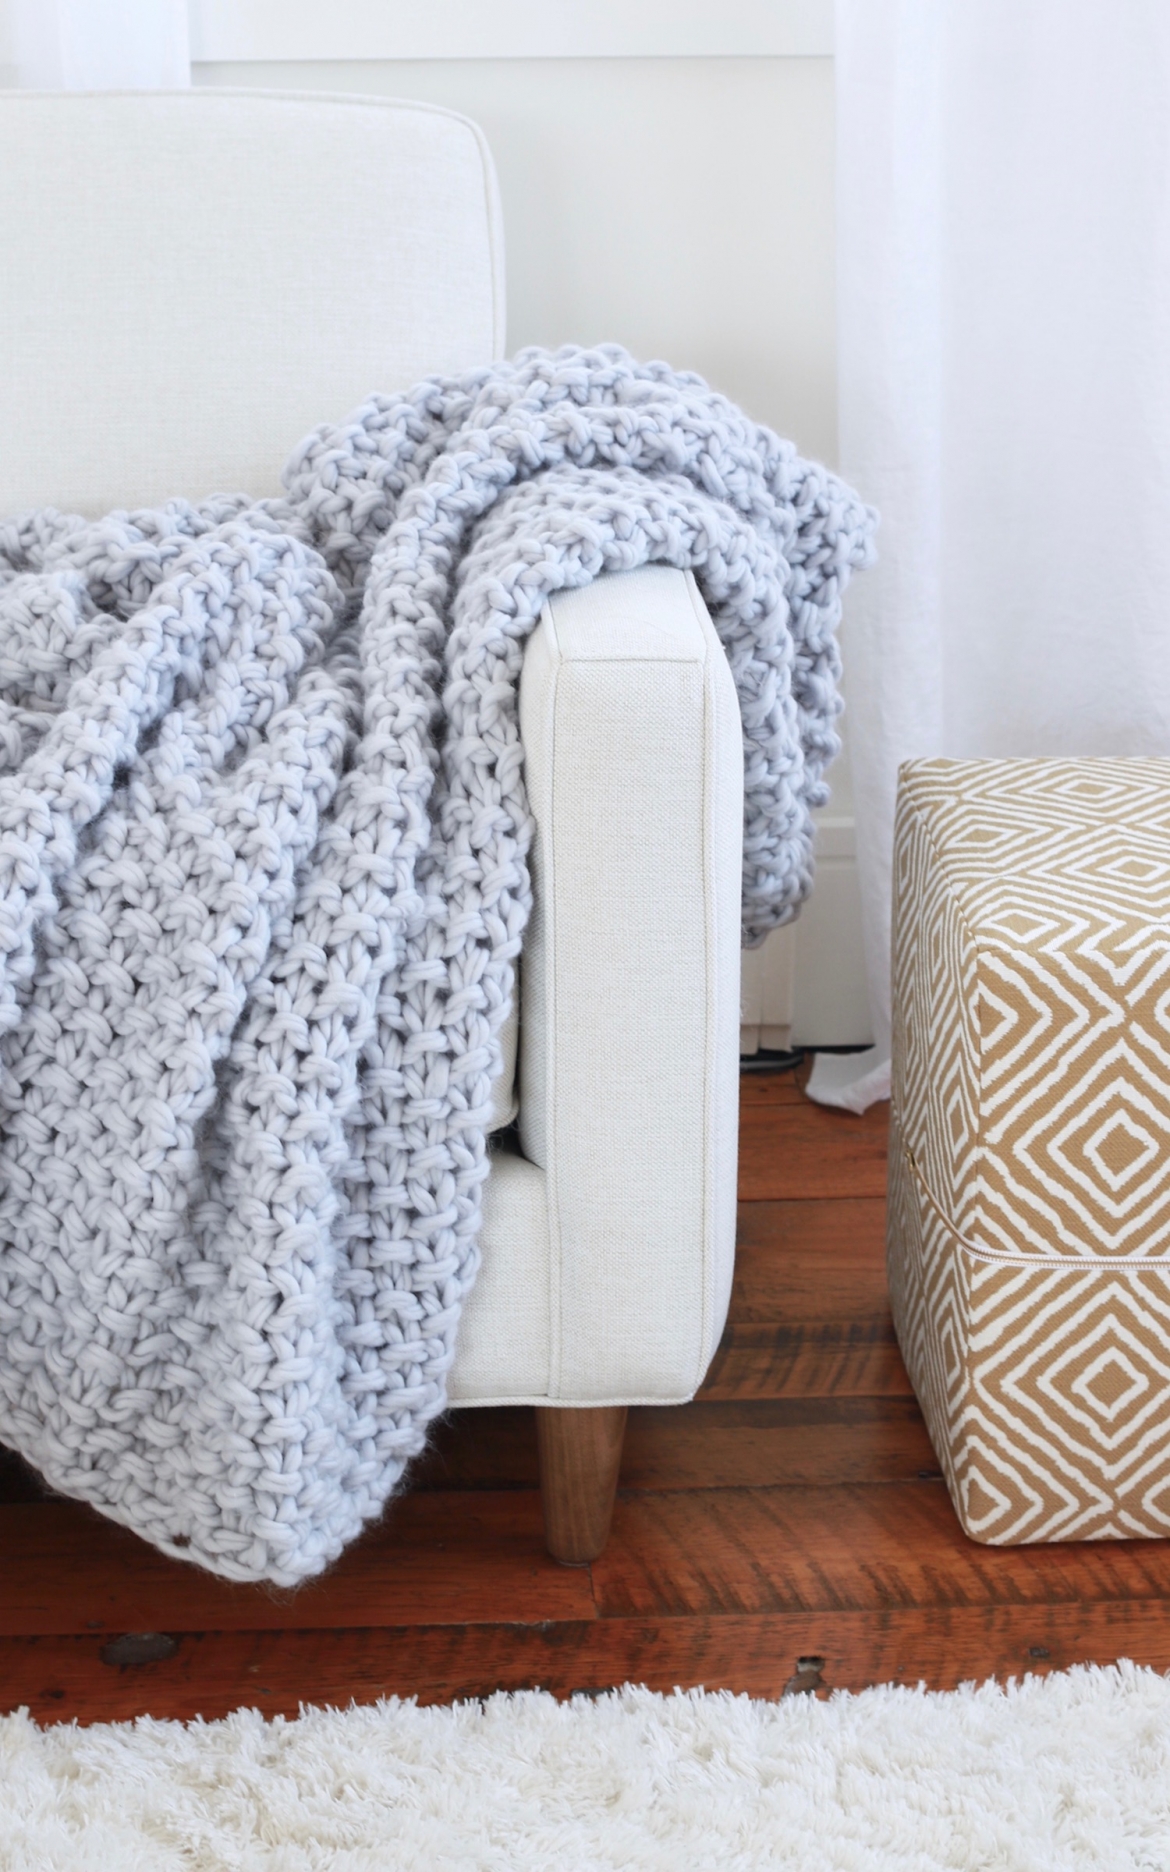 Knit your own chunky knit blanket ! Fabulous patterns, wool, knitting needles and chunky knit blanket kits via Lynne Knowlton | DESIGN THE LIFE YOU WANT TO LIVE